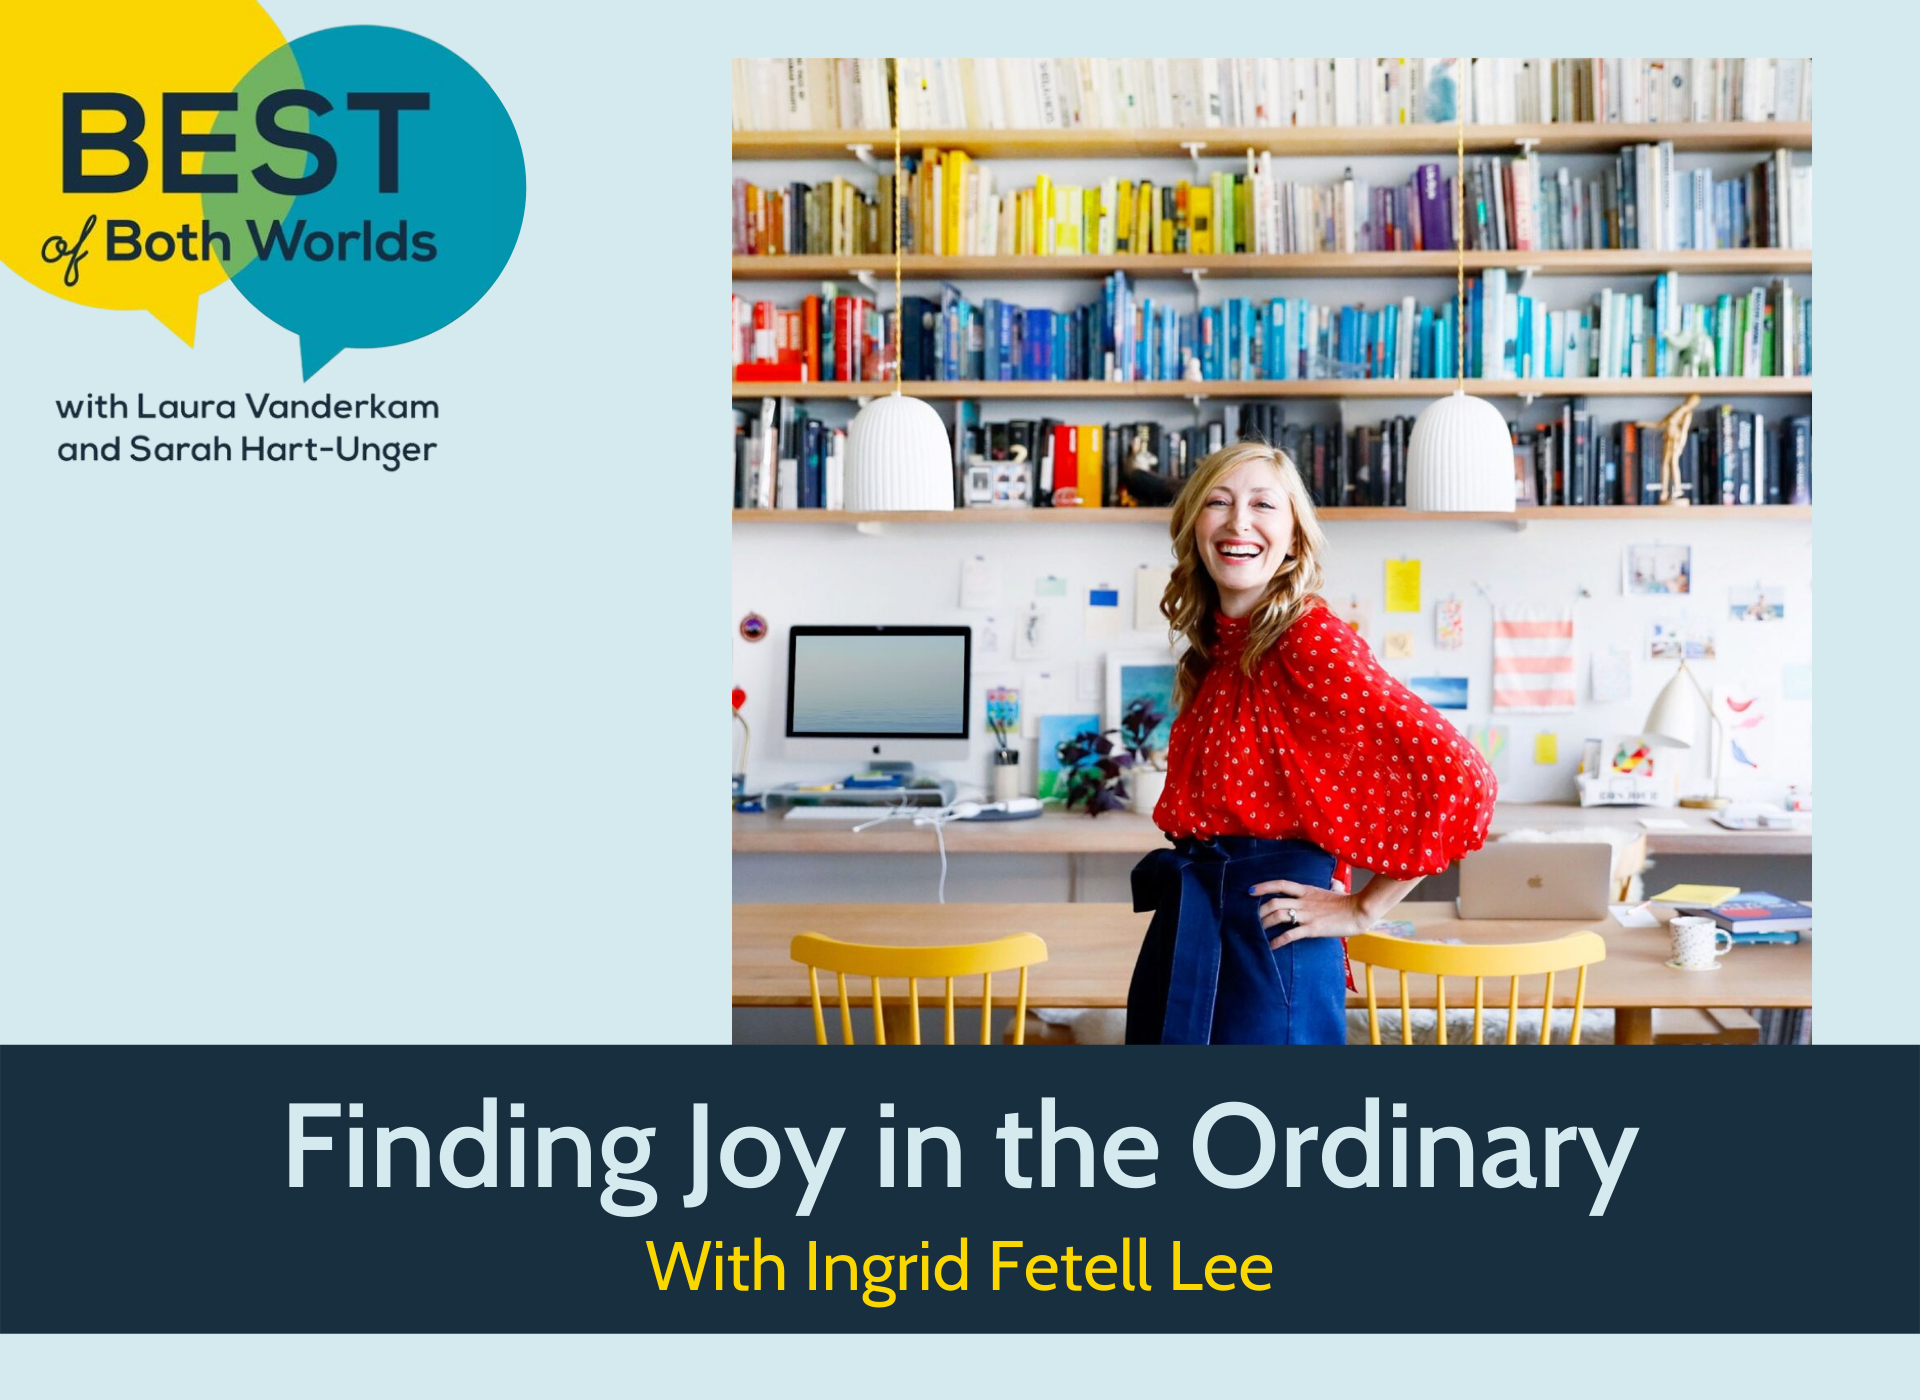 Best of Both Worlds podcast: Finding joy in the ordinary with Ingrid Fetell  Lee - Laura Vanderkam